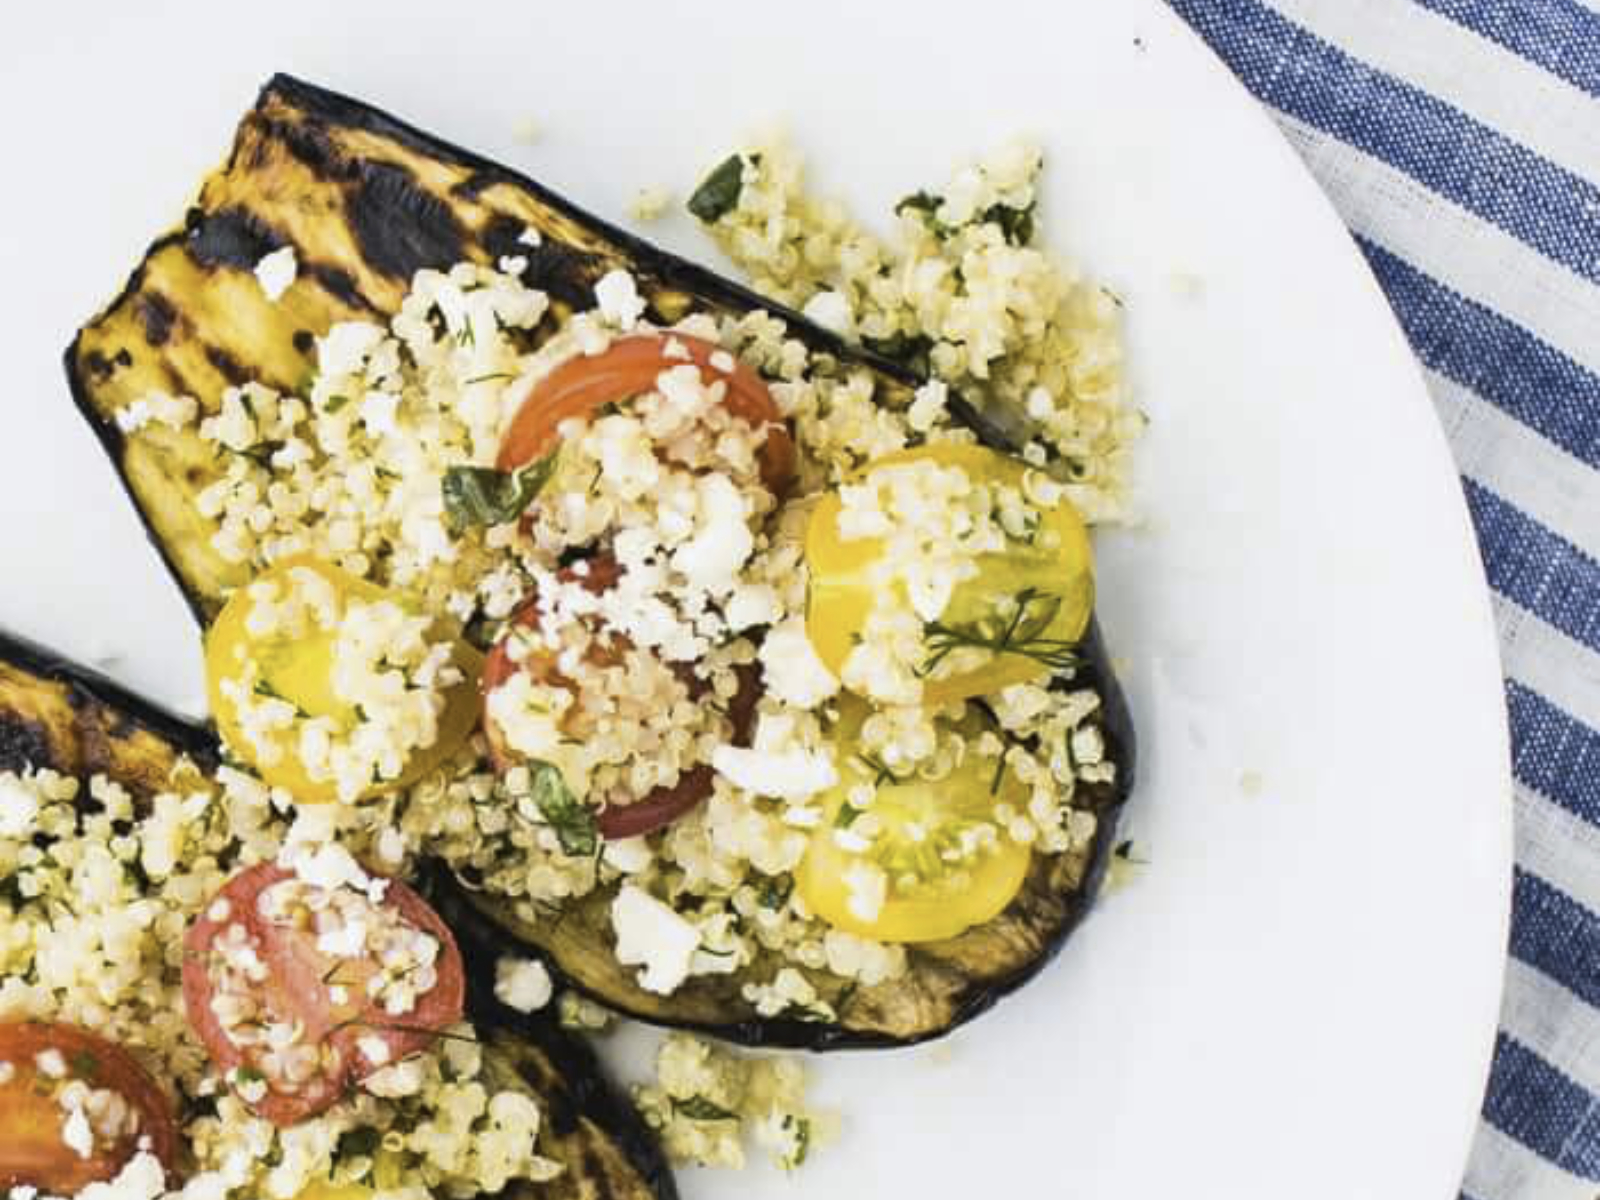 Herbed Quinoa with Grilled Eggplant